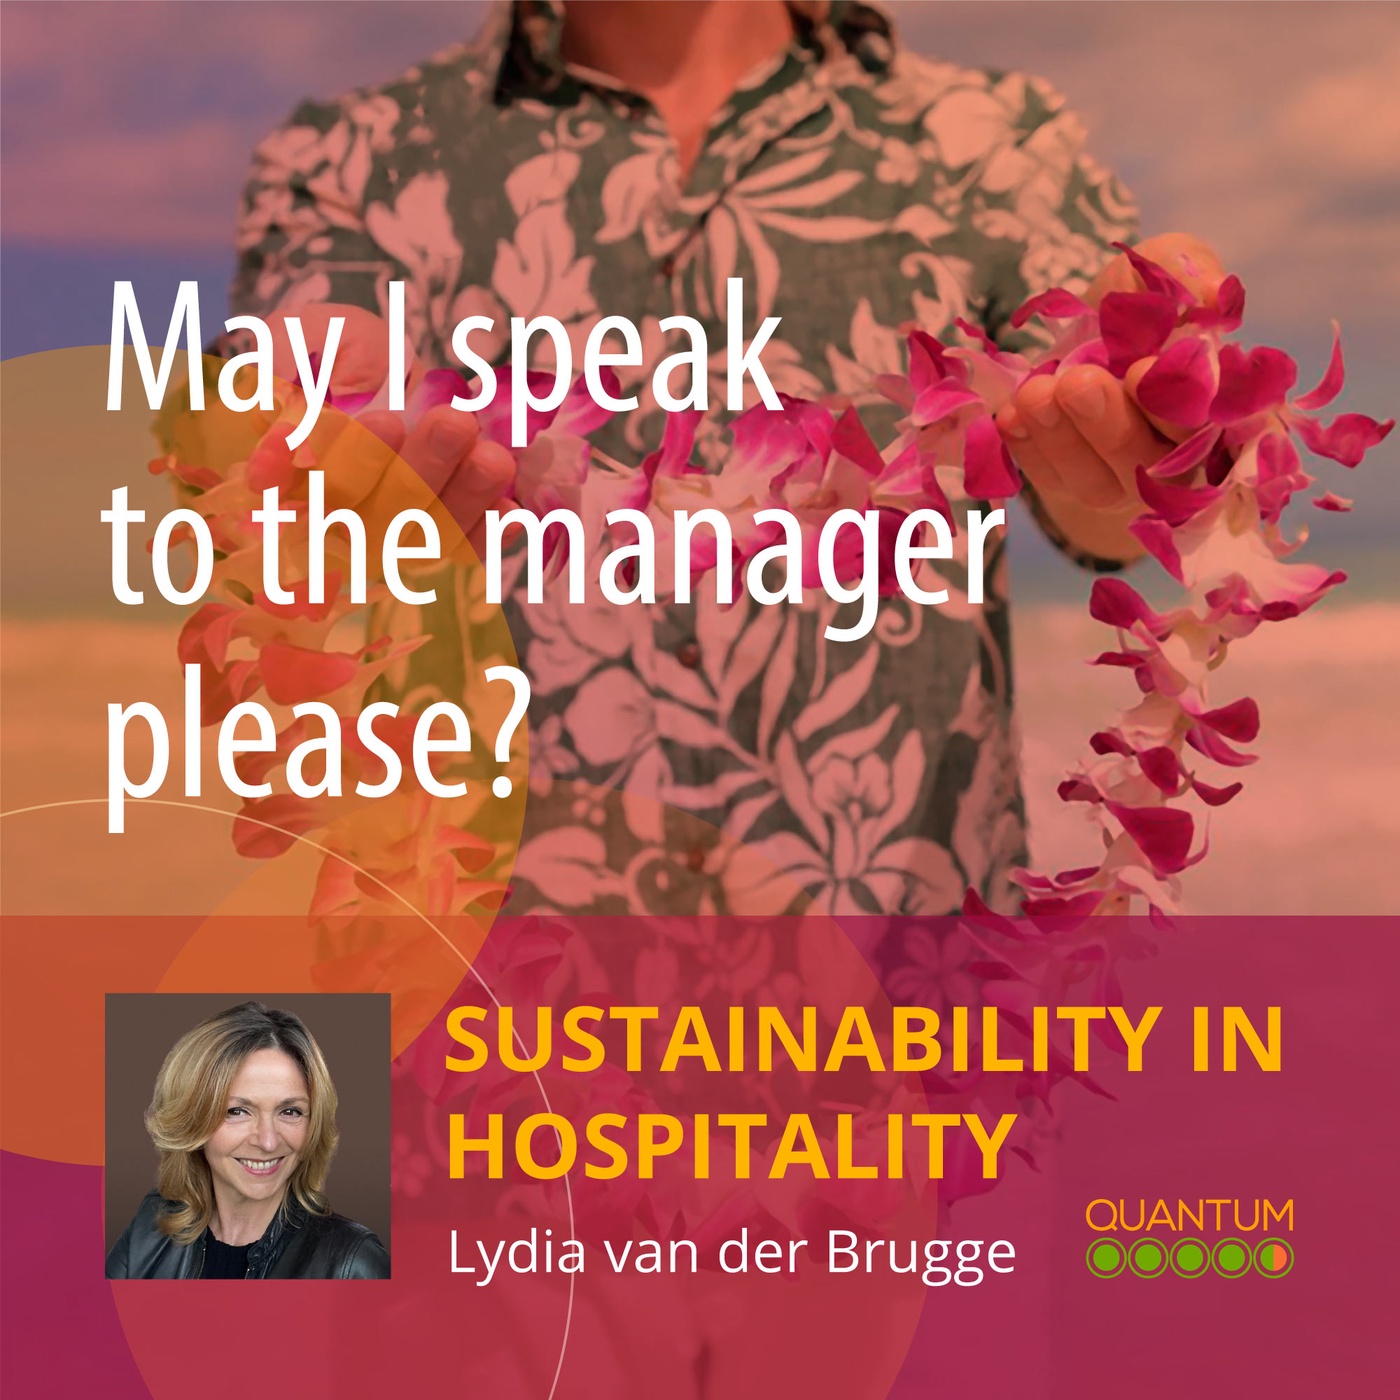 Hans Pfister, Cayuga Collection of Sustainable Luxury Hotels & Lodges